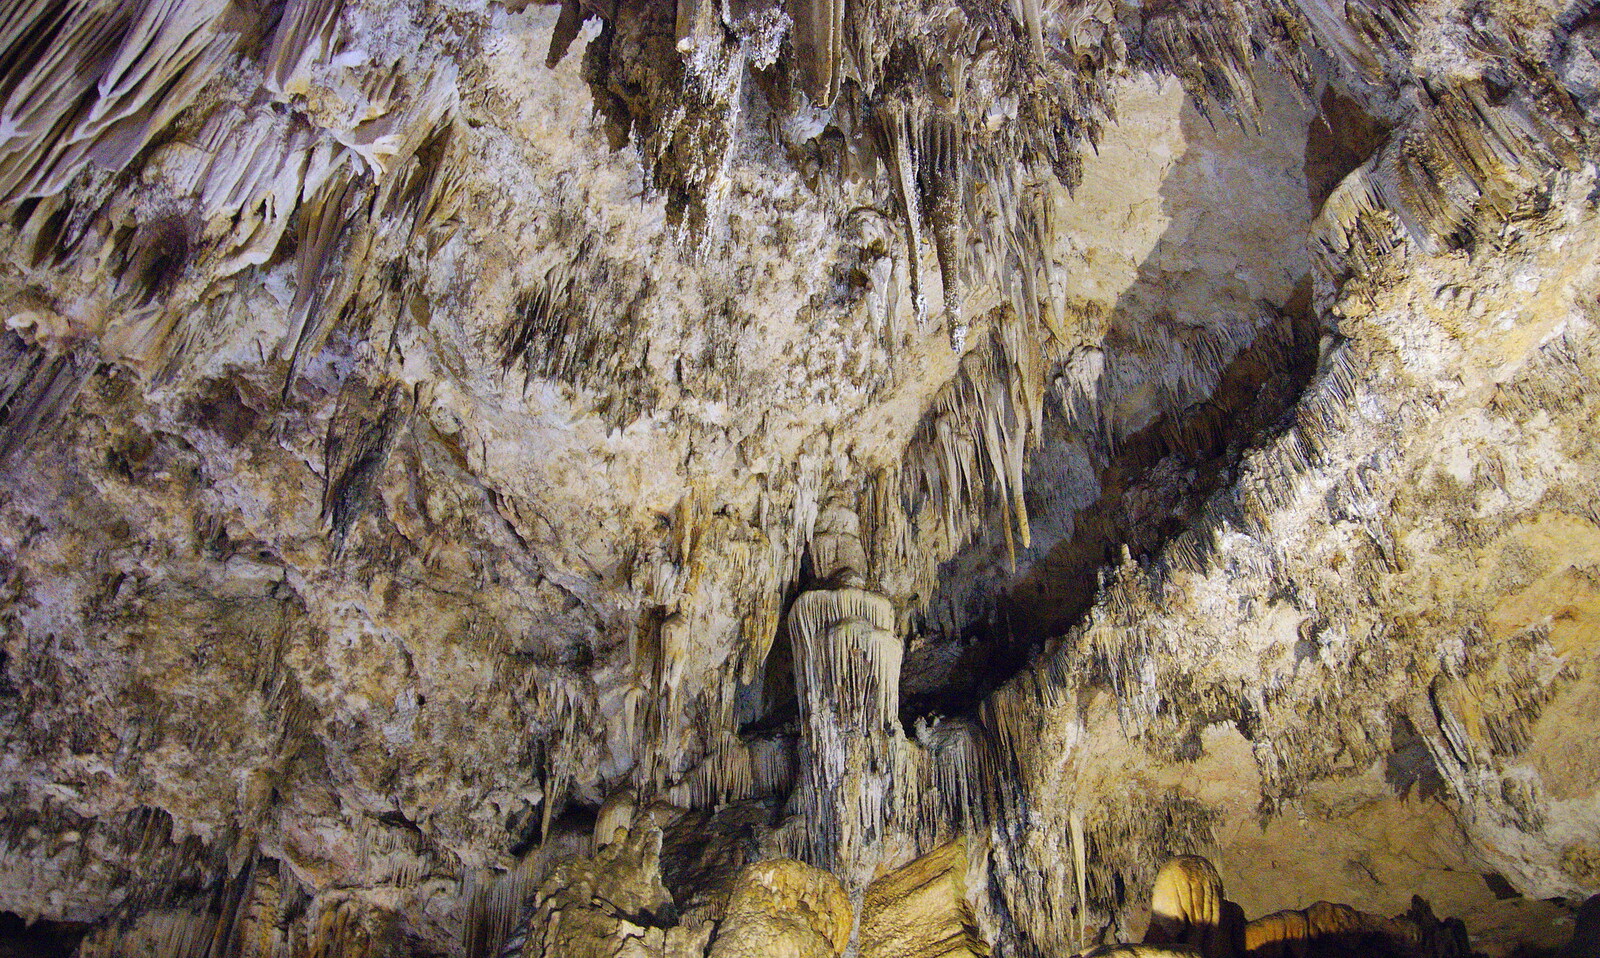 Another part of the cave from The Caves of Nerja, and Frigiliana, Andalusia, Spain - 18th April 2019